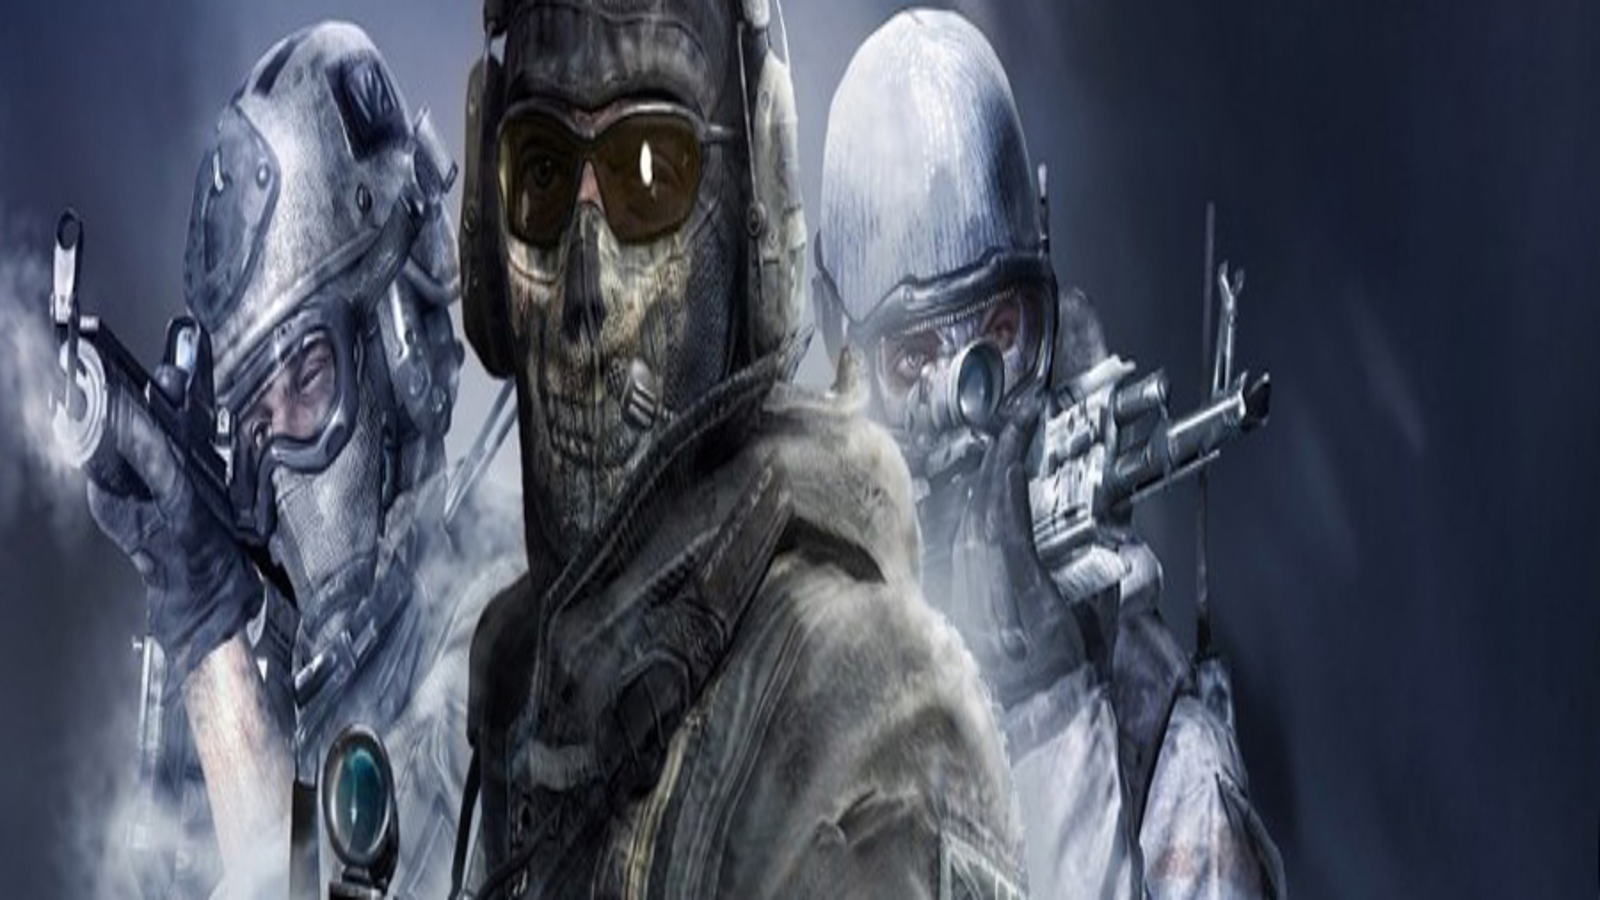 Call of Duty: Ghosts review roundup, Call of Duty